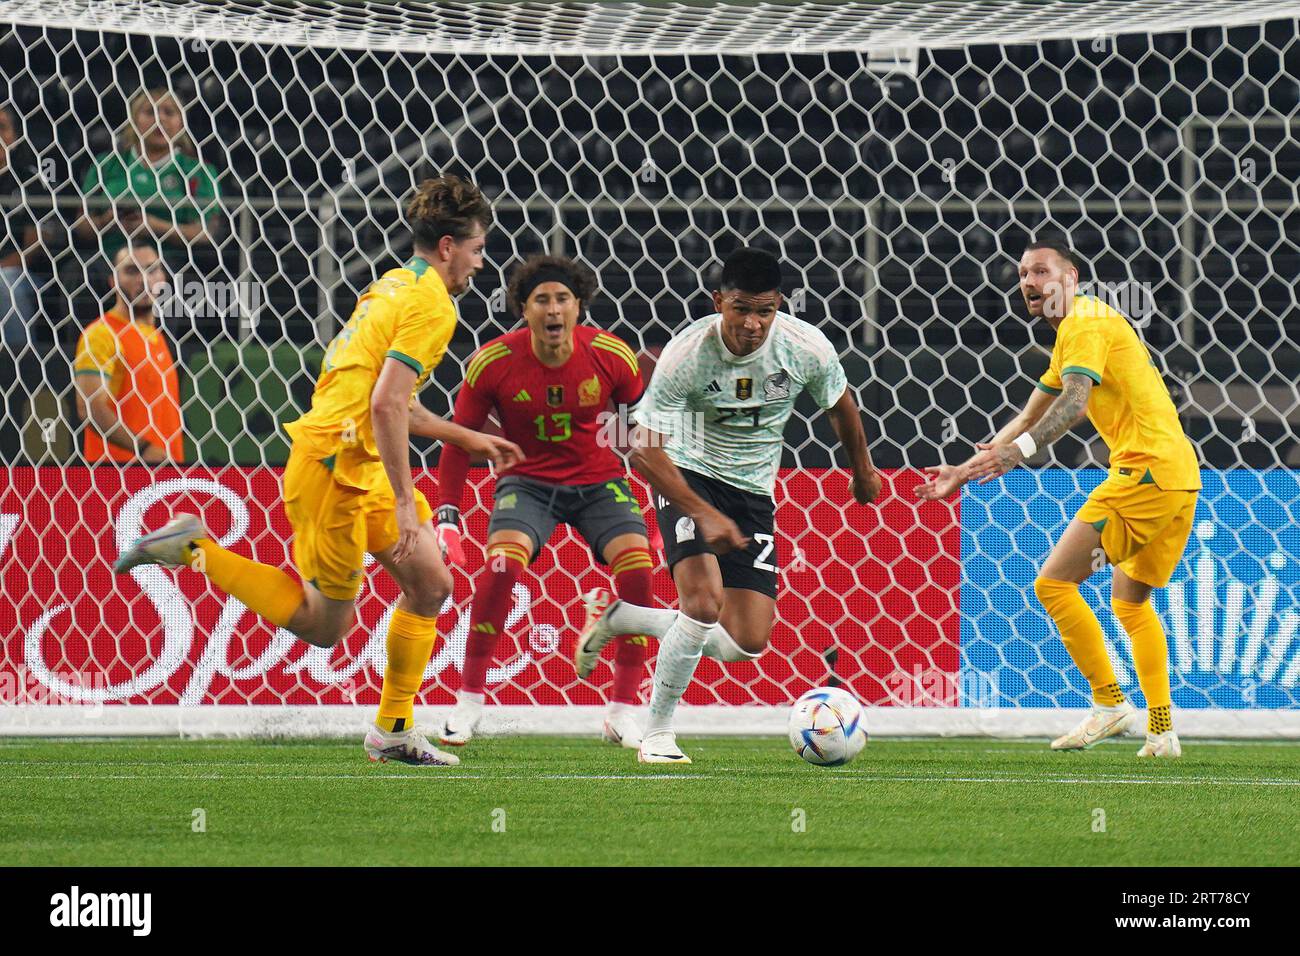 Arlington, Texas, United States: Jesus Gallardo (MX) in action during the international soccer game between Mexico and Australia played at AT&T Stadium on Saturday September 9, 2023.  (Photo by Javier Vicencio / Eyepix Group/Sipa USA) Stock Photo